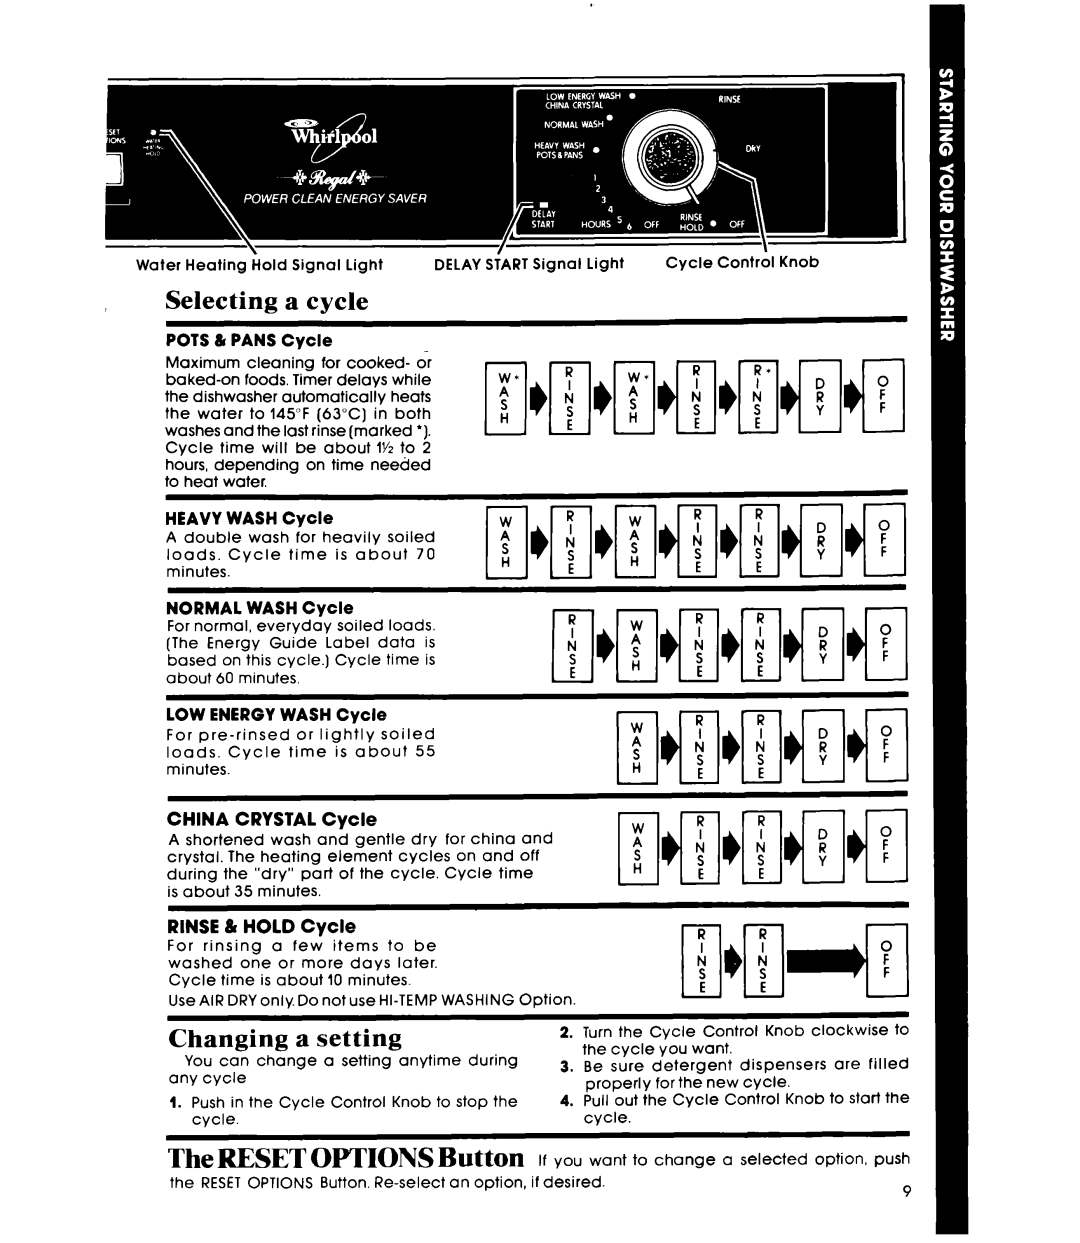 Whirlpool DU7503XL manual Selecting a cycle, Changing, a setting, CHINA CRYSTAL Cycle, RINSE & HOLD Cycle 